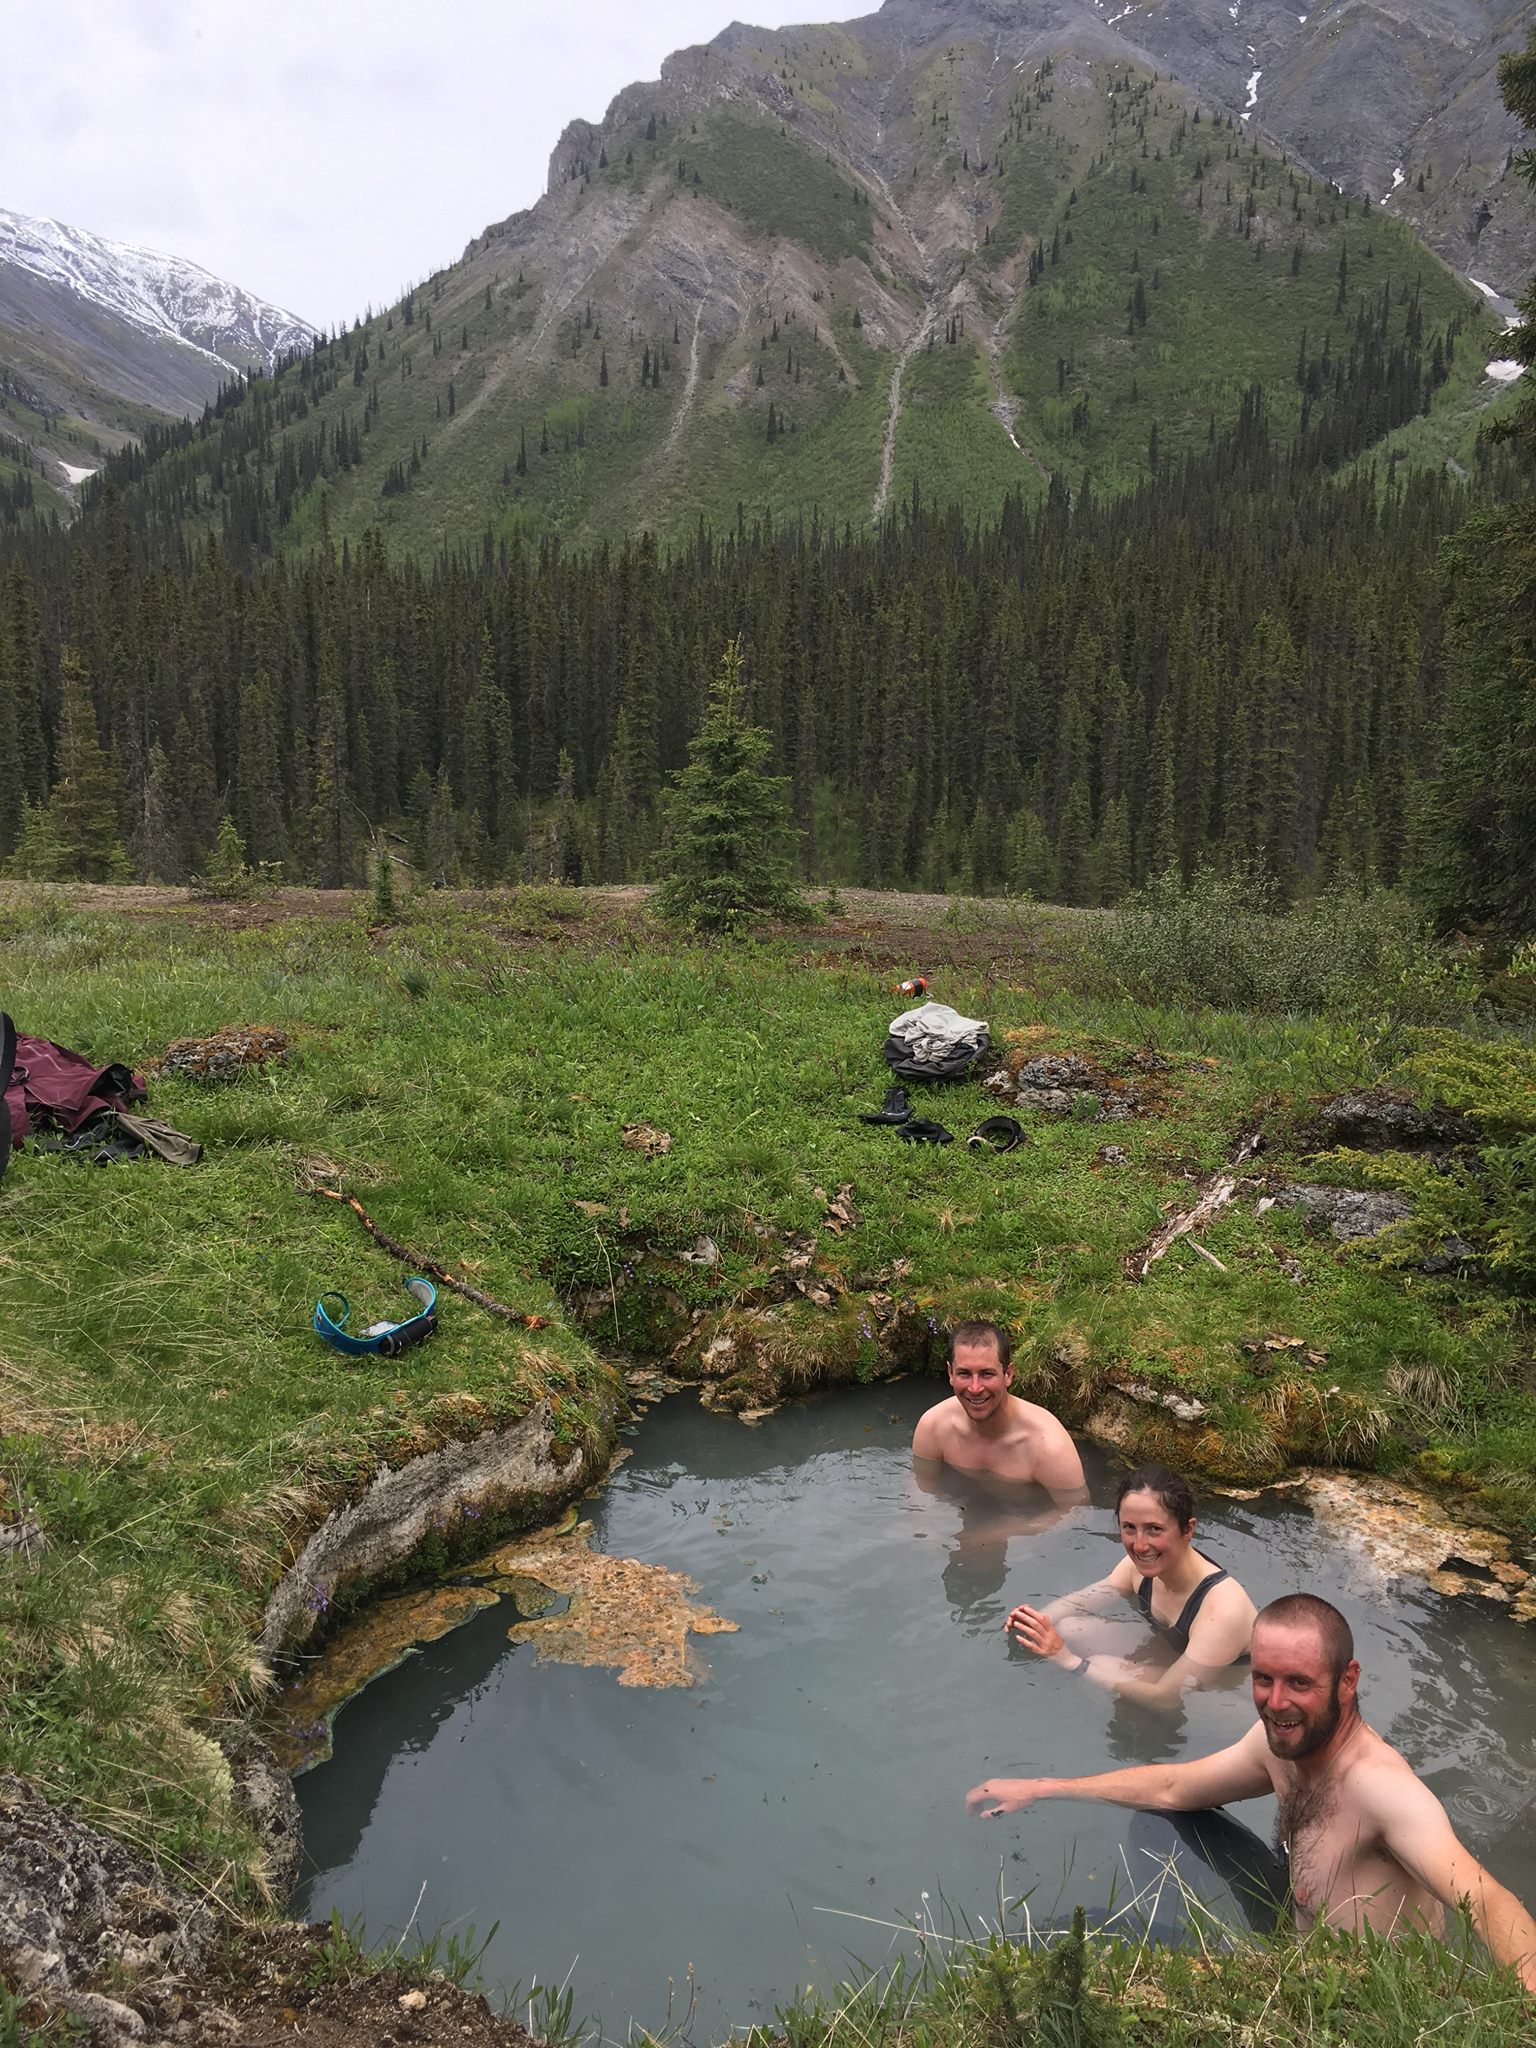 Hot springs before Grizzly Lake